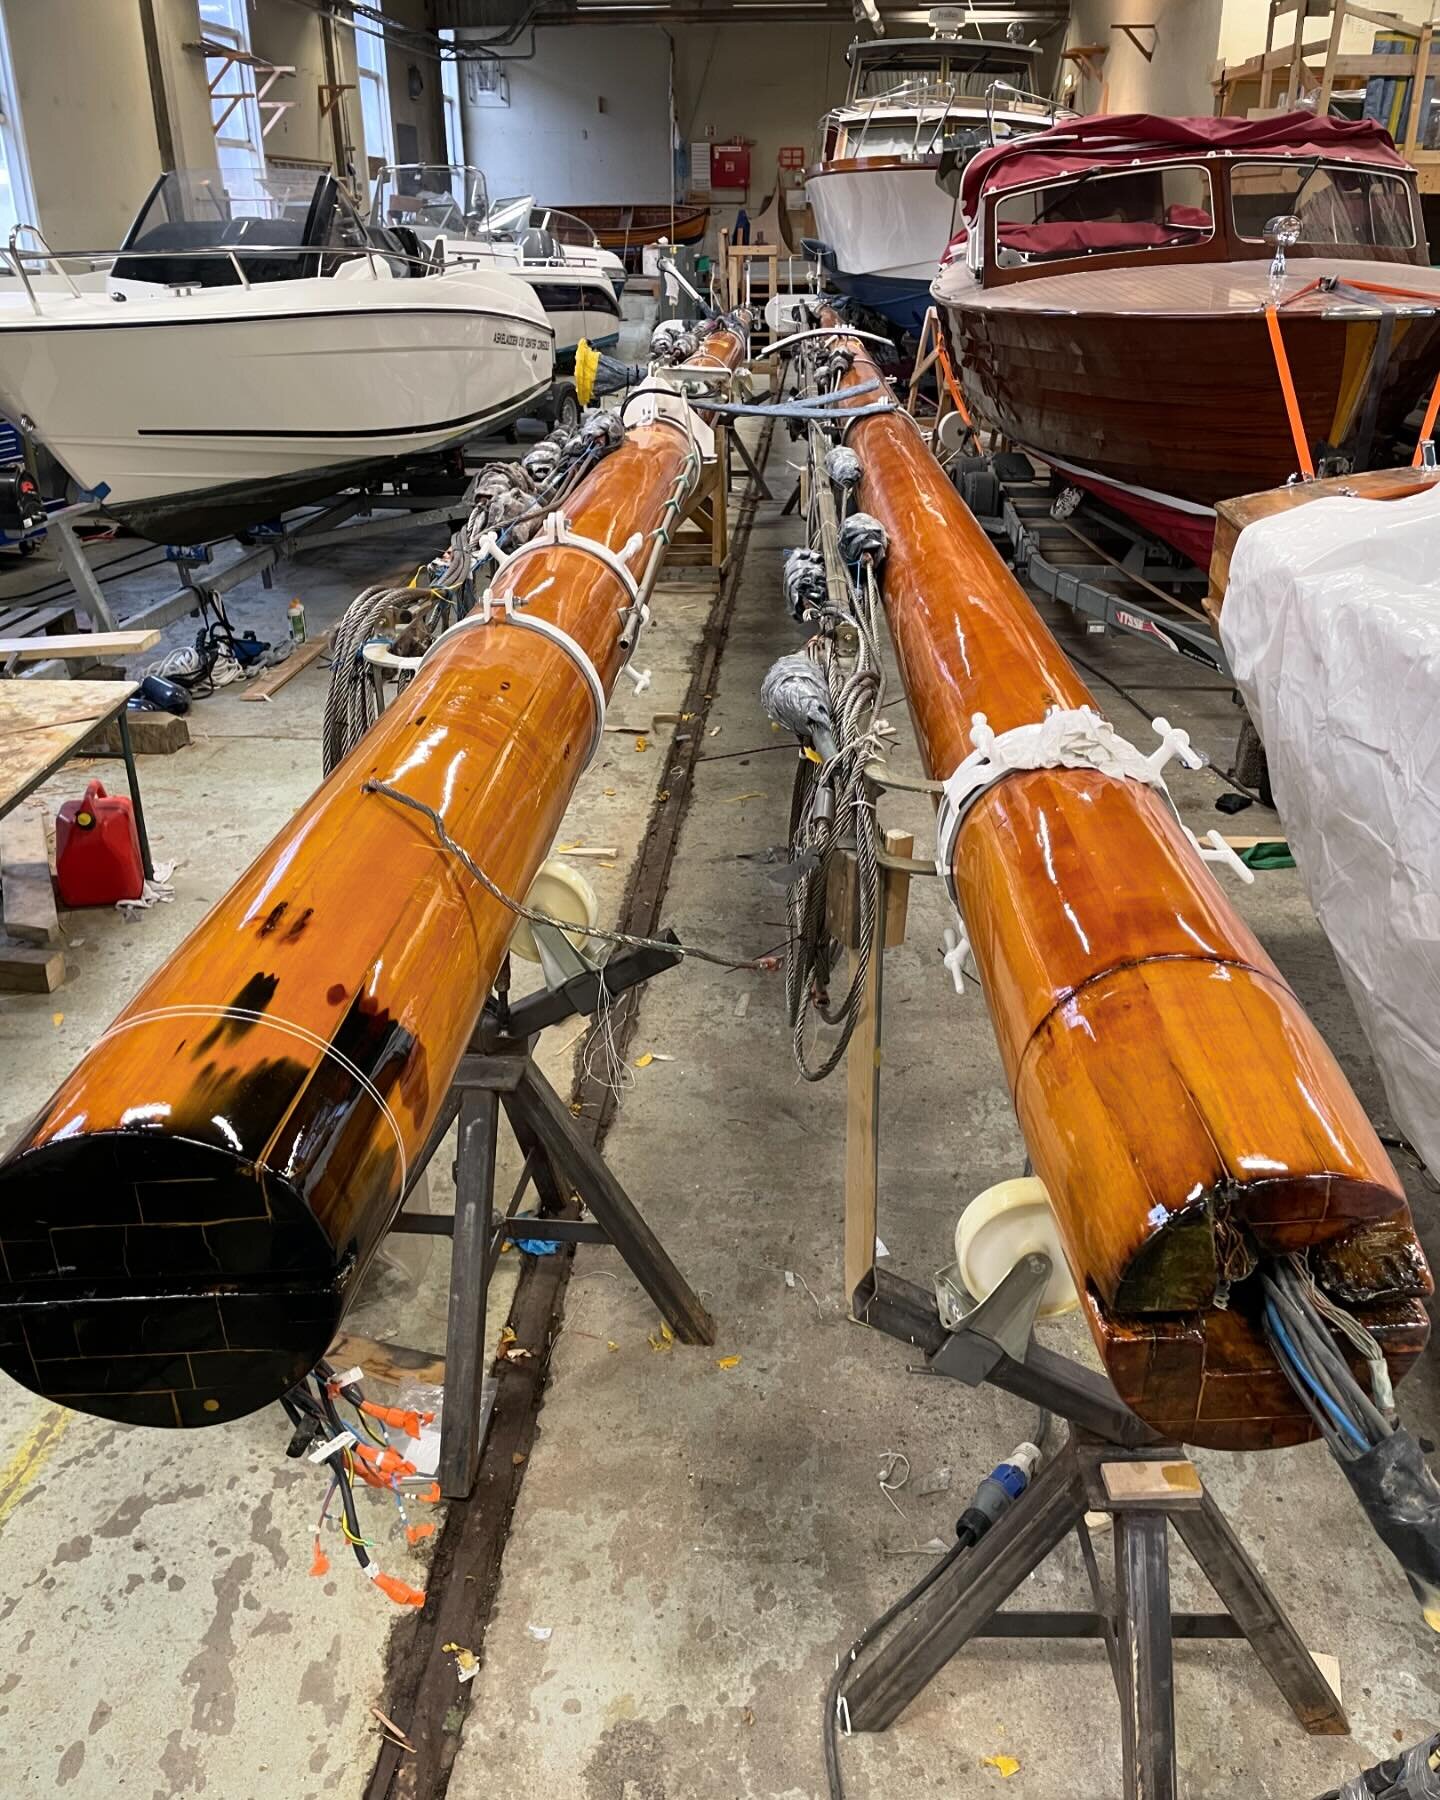 These two oregon pine masts are ready to be delivered. Rune, David and Vjeko have done an incredible job of repairing, sanding, varnishing and assembling.
All fittings are sanded and painted before mounting. Led plating have been used underneath all 